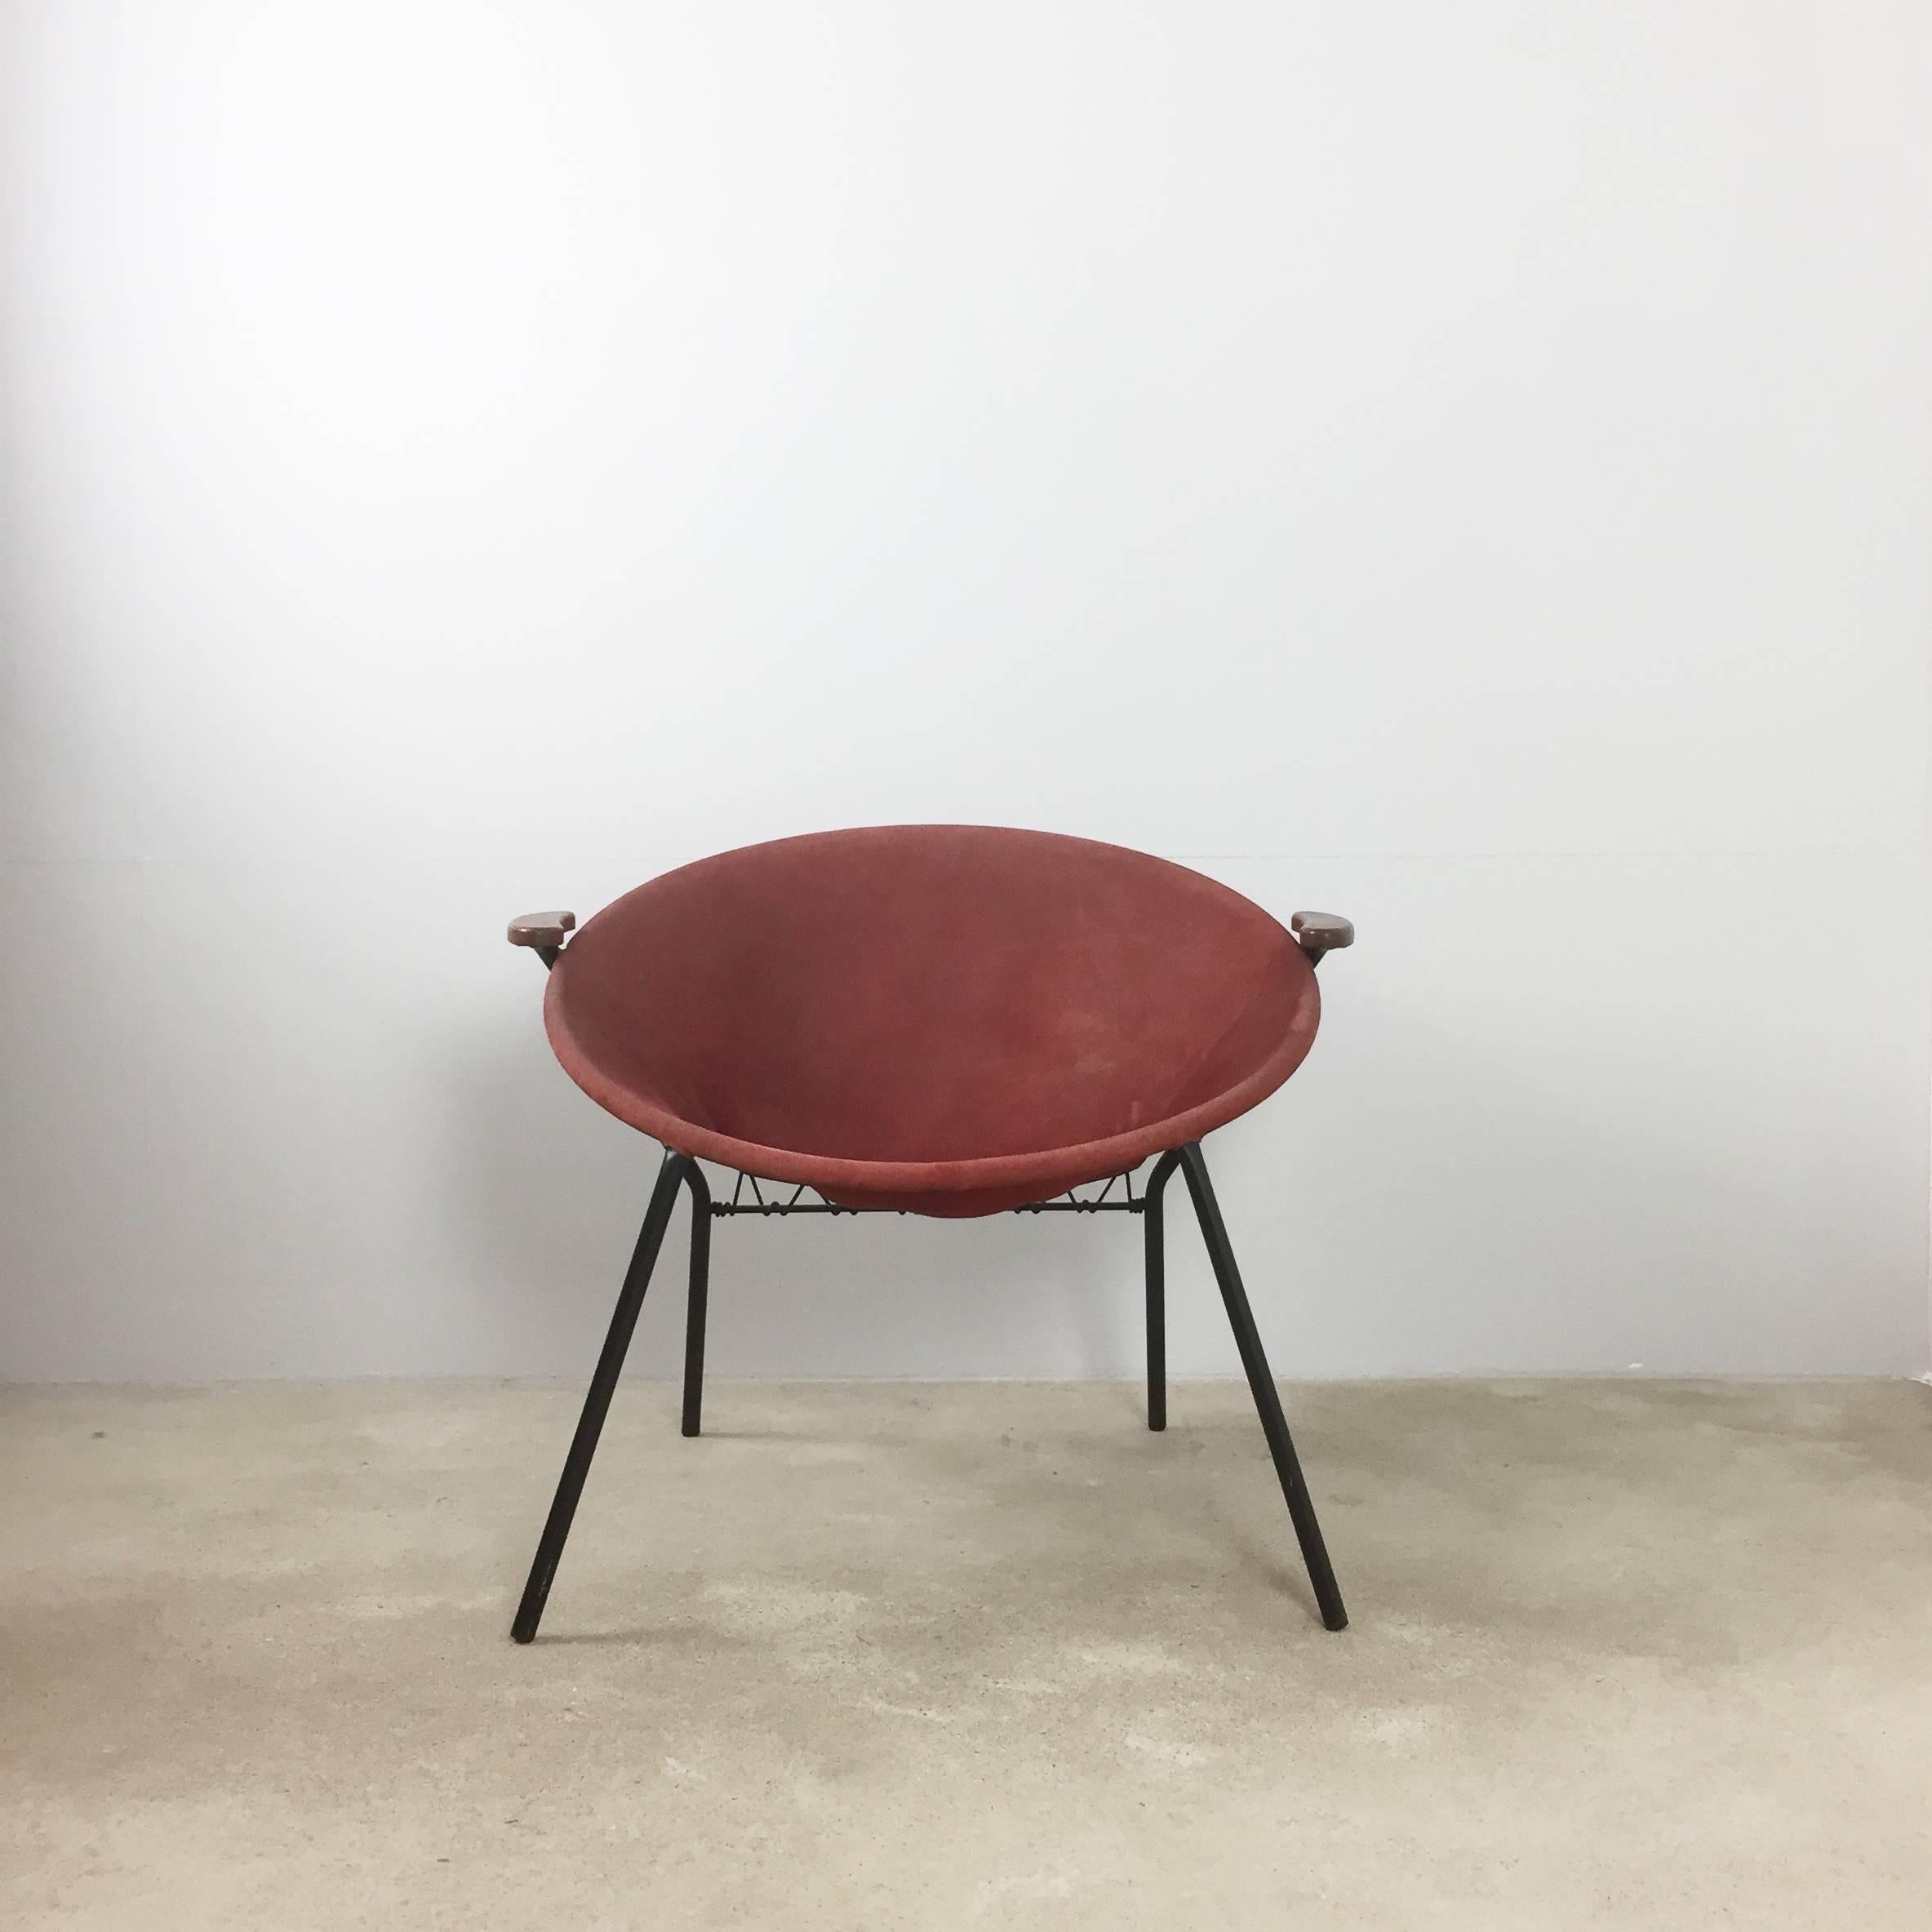 Article:

Balloon chair


Design:

Hans Olsen


Producer:

LEA A/S, Denmark


Decade:

1950s


 

This chair was designed by Hans Olsen and manufactured in LEA A/S in Denmark in the 1950s. The frame of this chair is made of